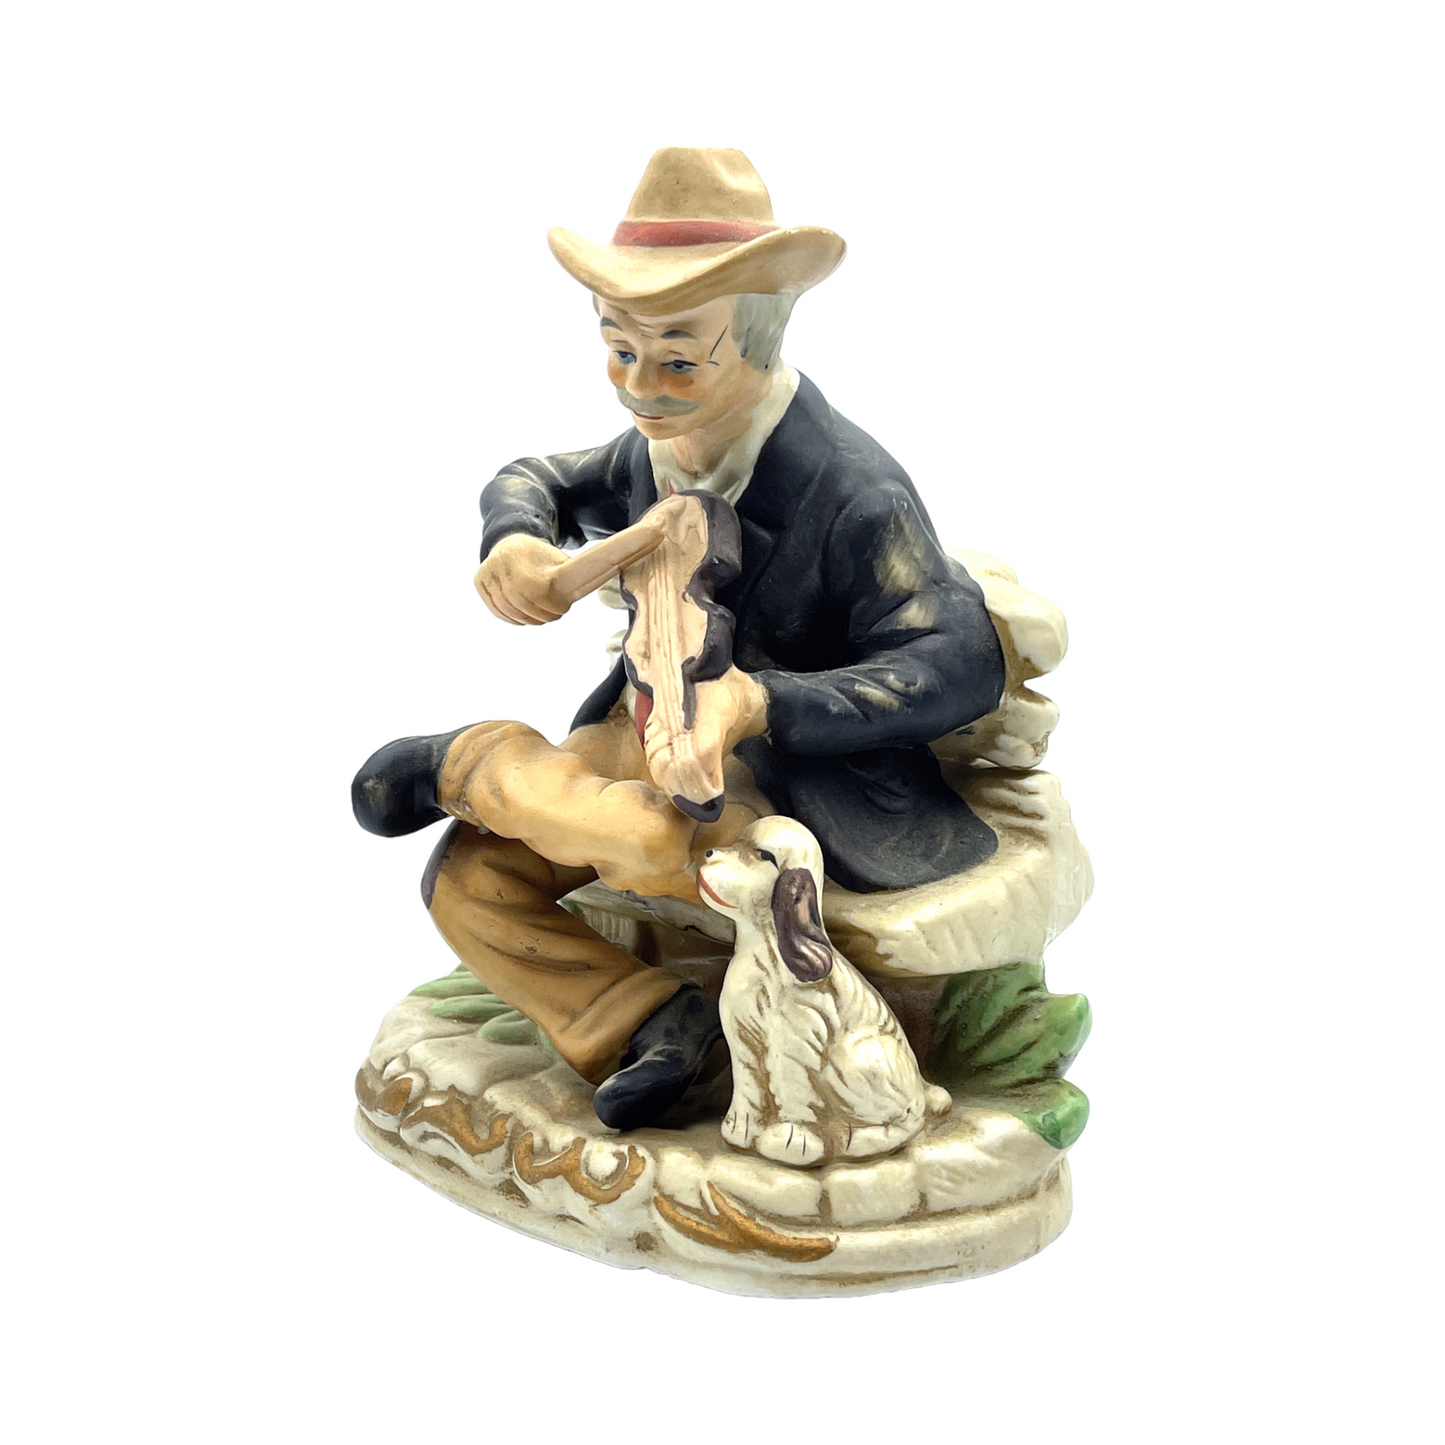 Homco Porcelain - Man Playing Fiddle With Dog Figurine - Vintage